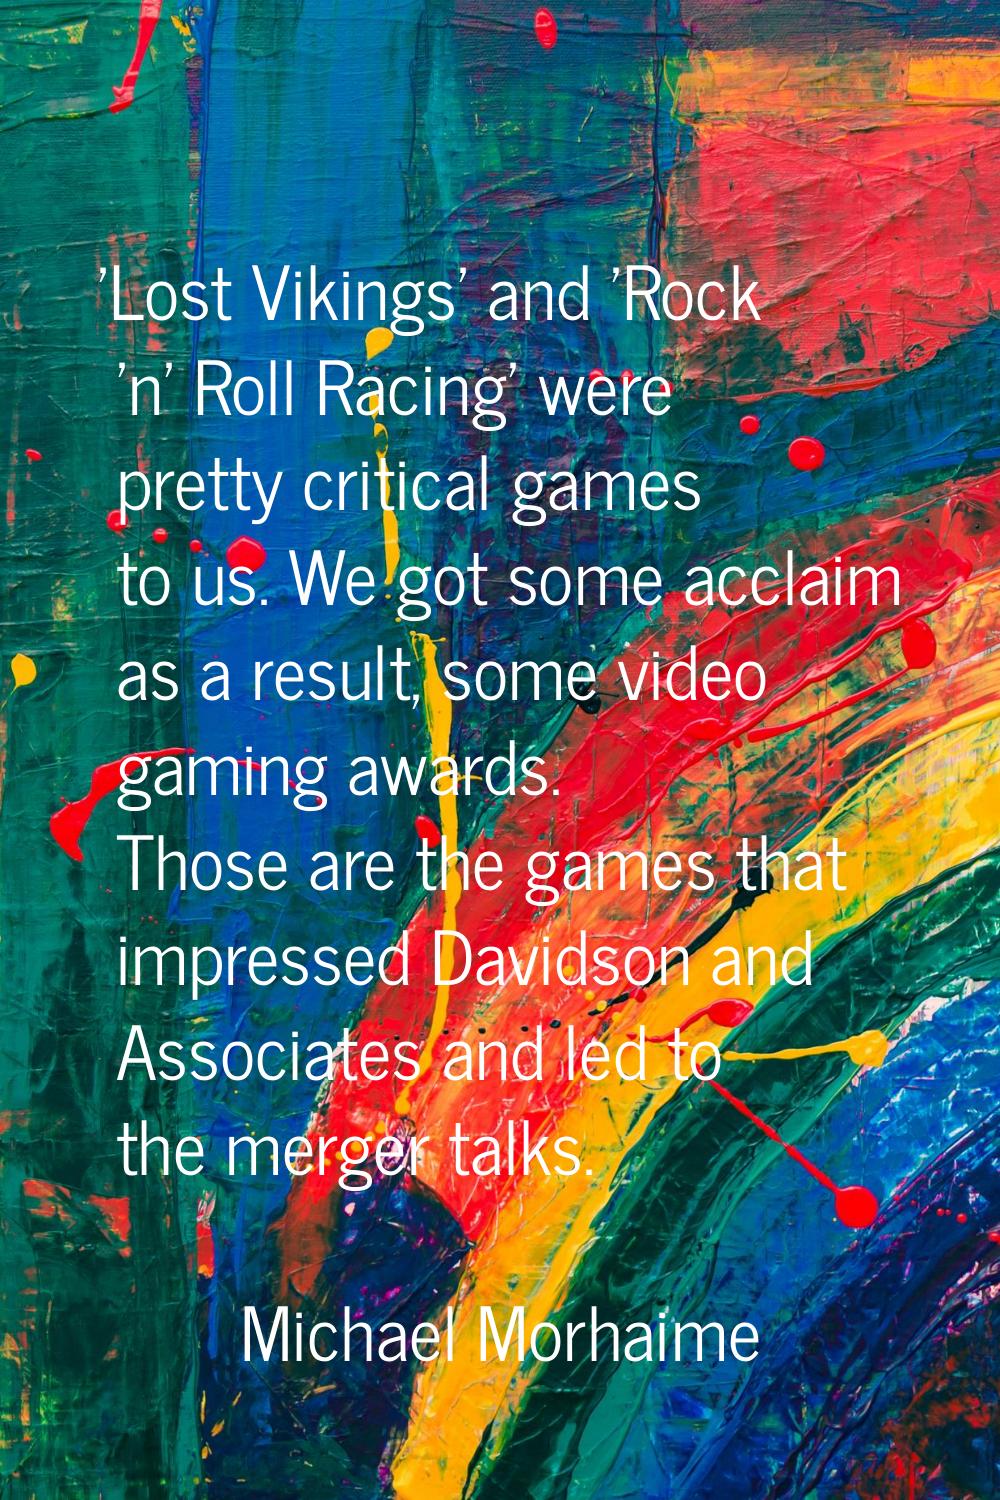 'Lost Vikings' and 'Rock 'n' Roll Racing' were pretty critical games to us. We got some acclaim as 